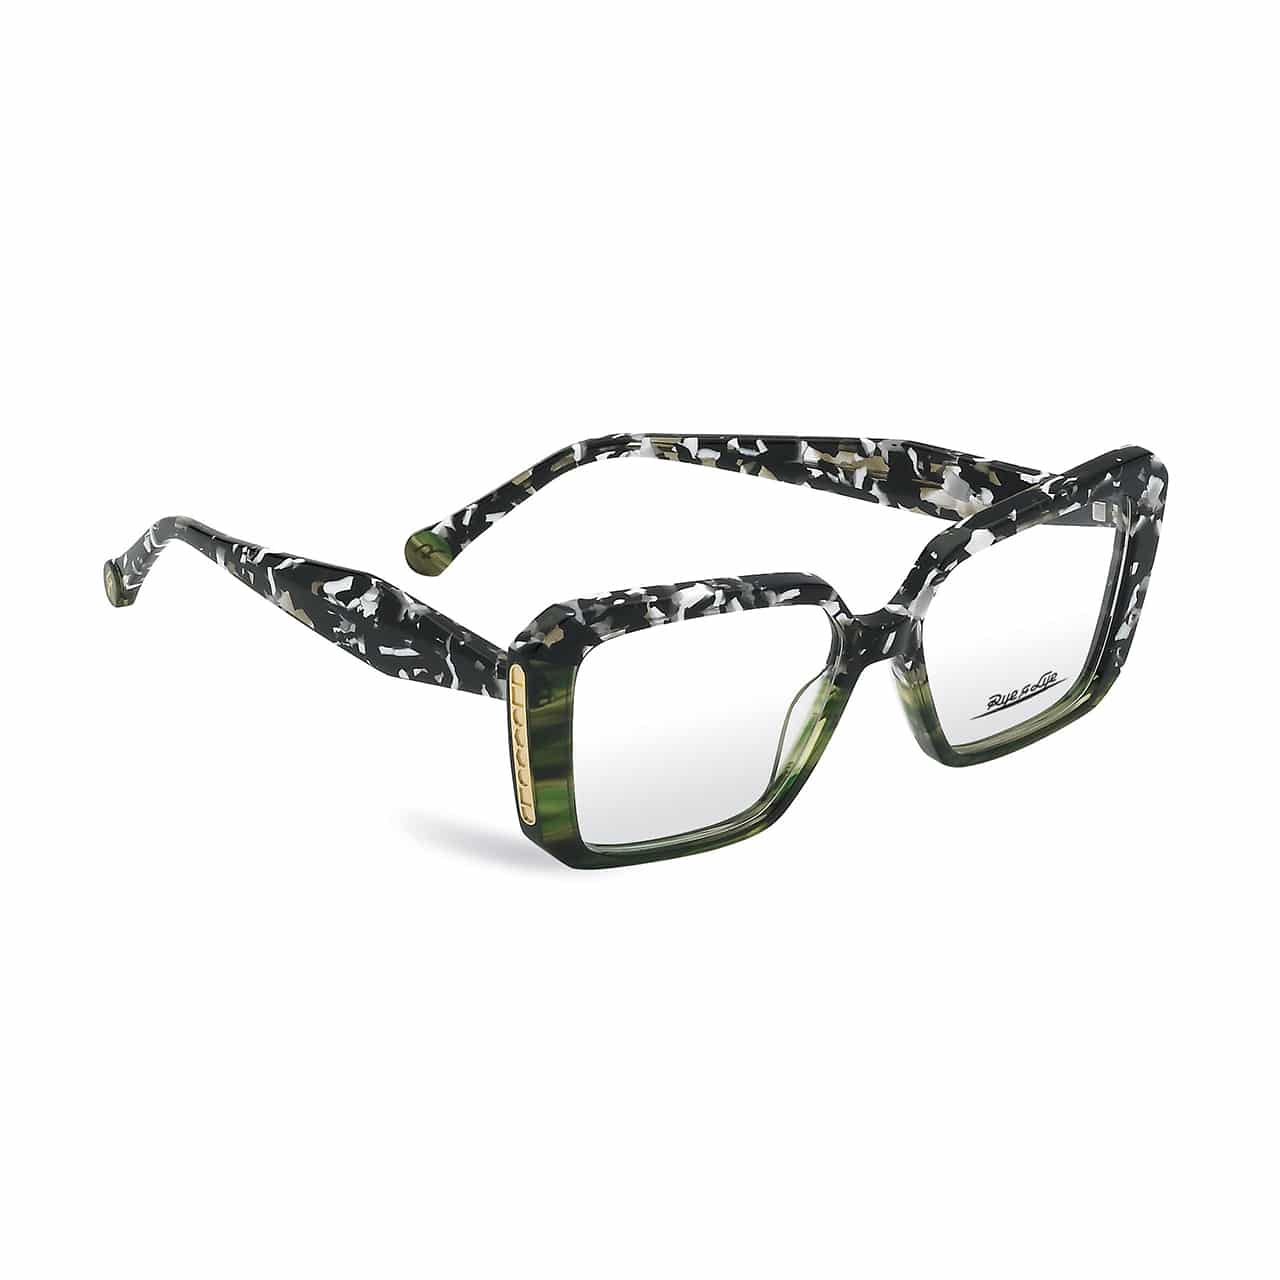 Retro eyeglasses with thick square frames, black and white camouflage pattern with green accents, thick temples and gold plaque on the hinge.